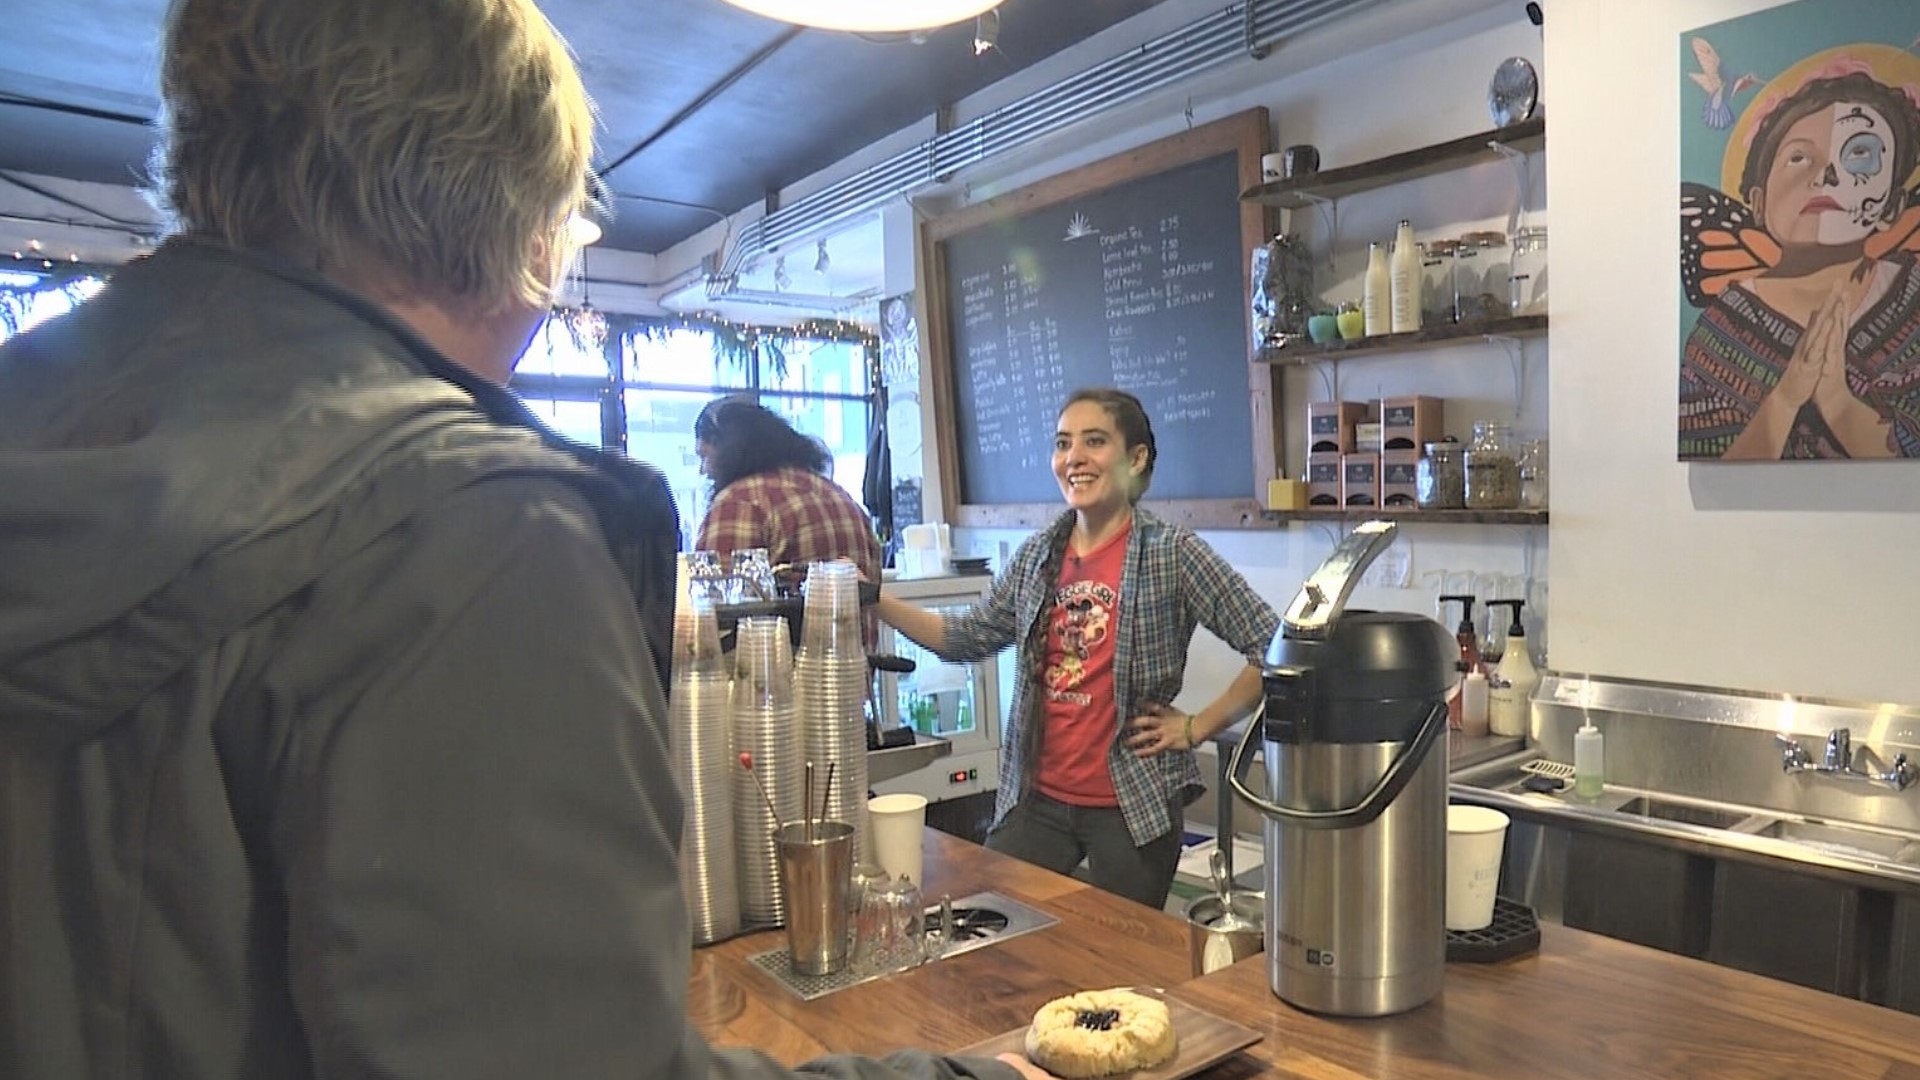 Resistencia Coffee wants every customer to feel welcomed and supported by the local community